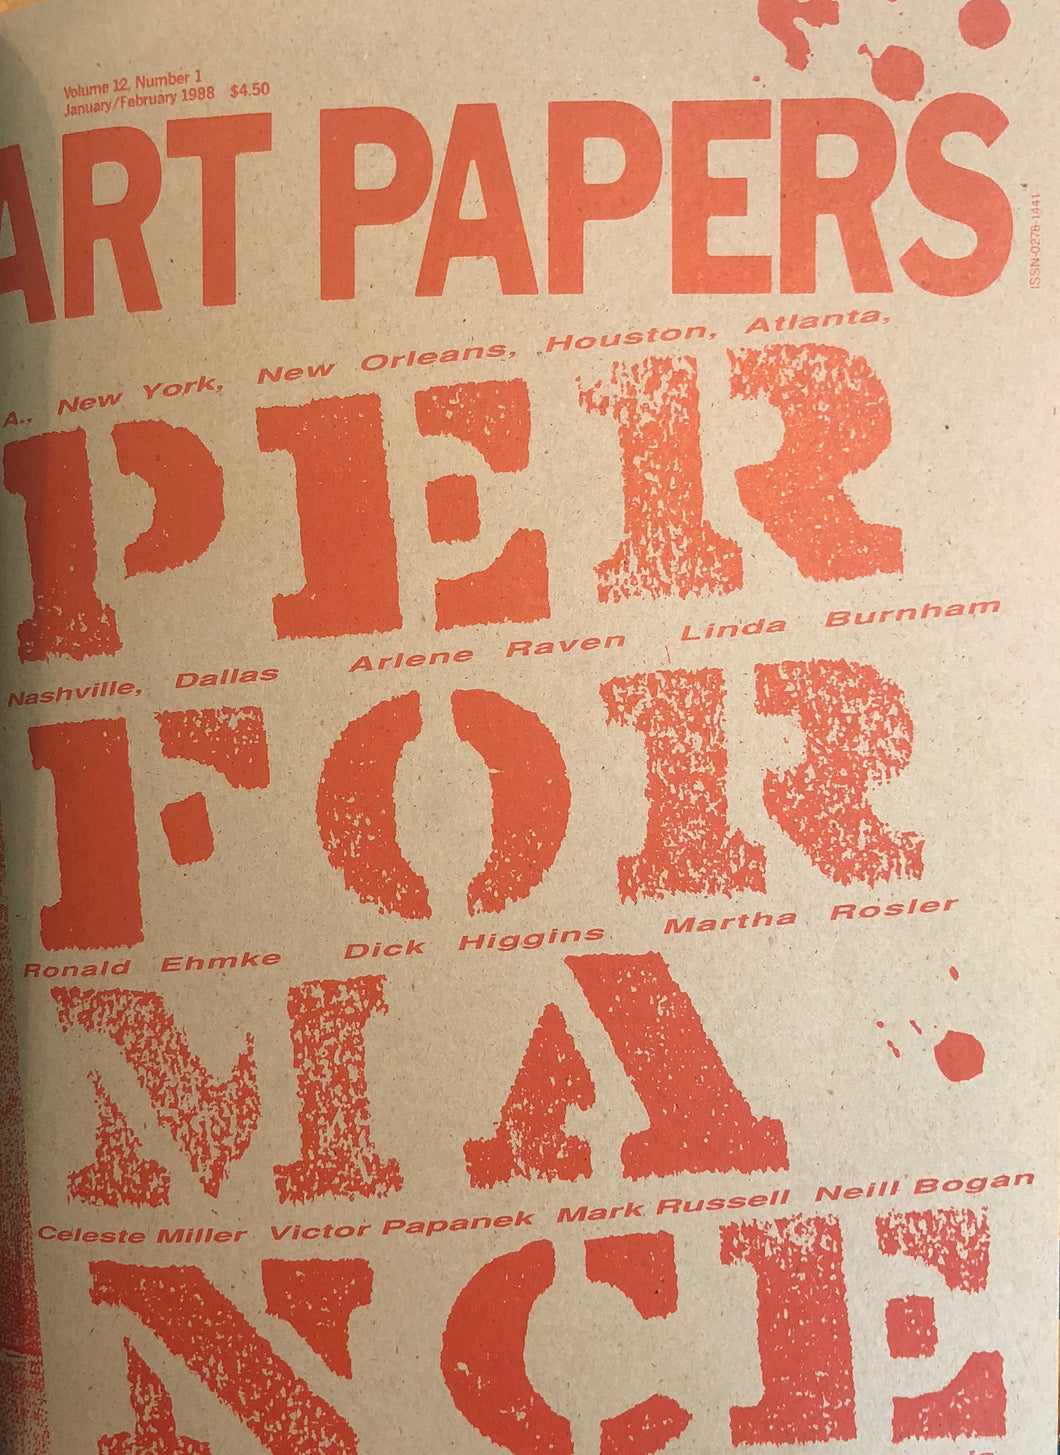 ART PAPERS 12.01 - Jan/Feb 1988 - SOLD OUT